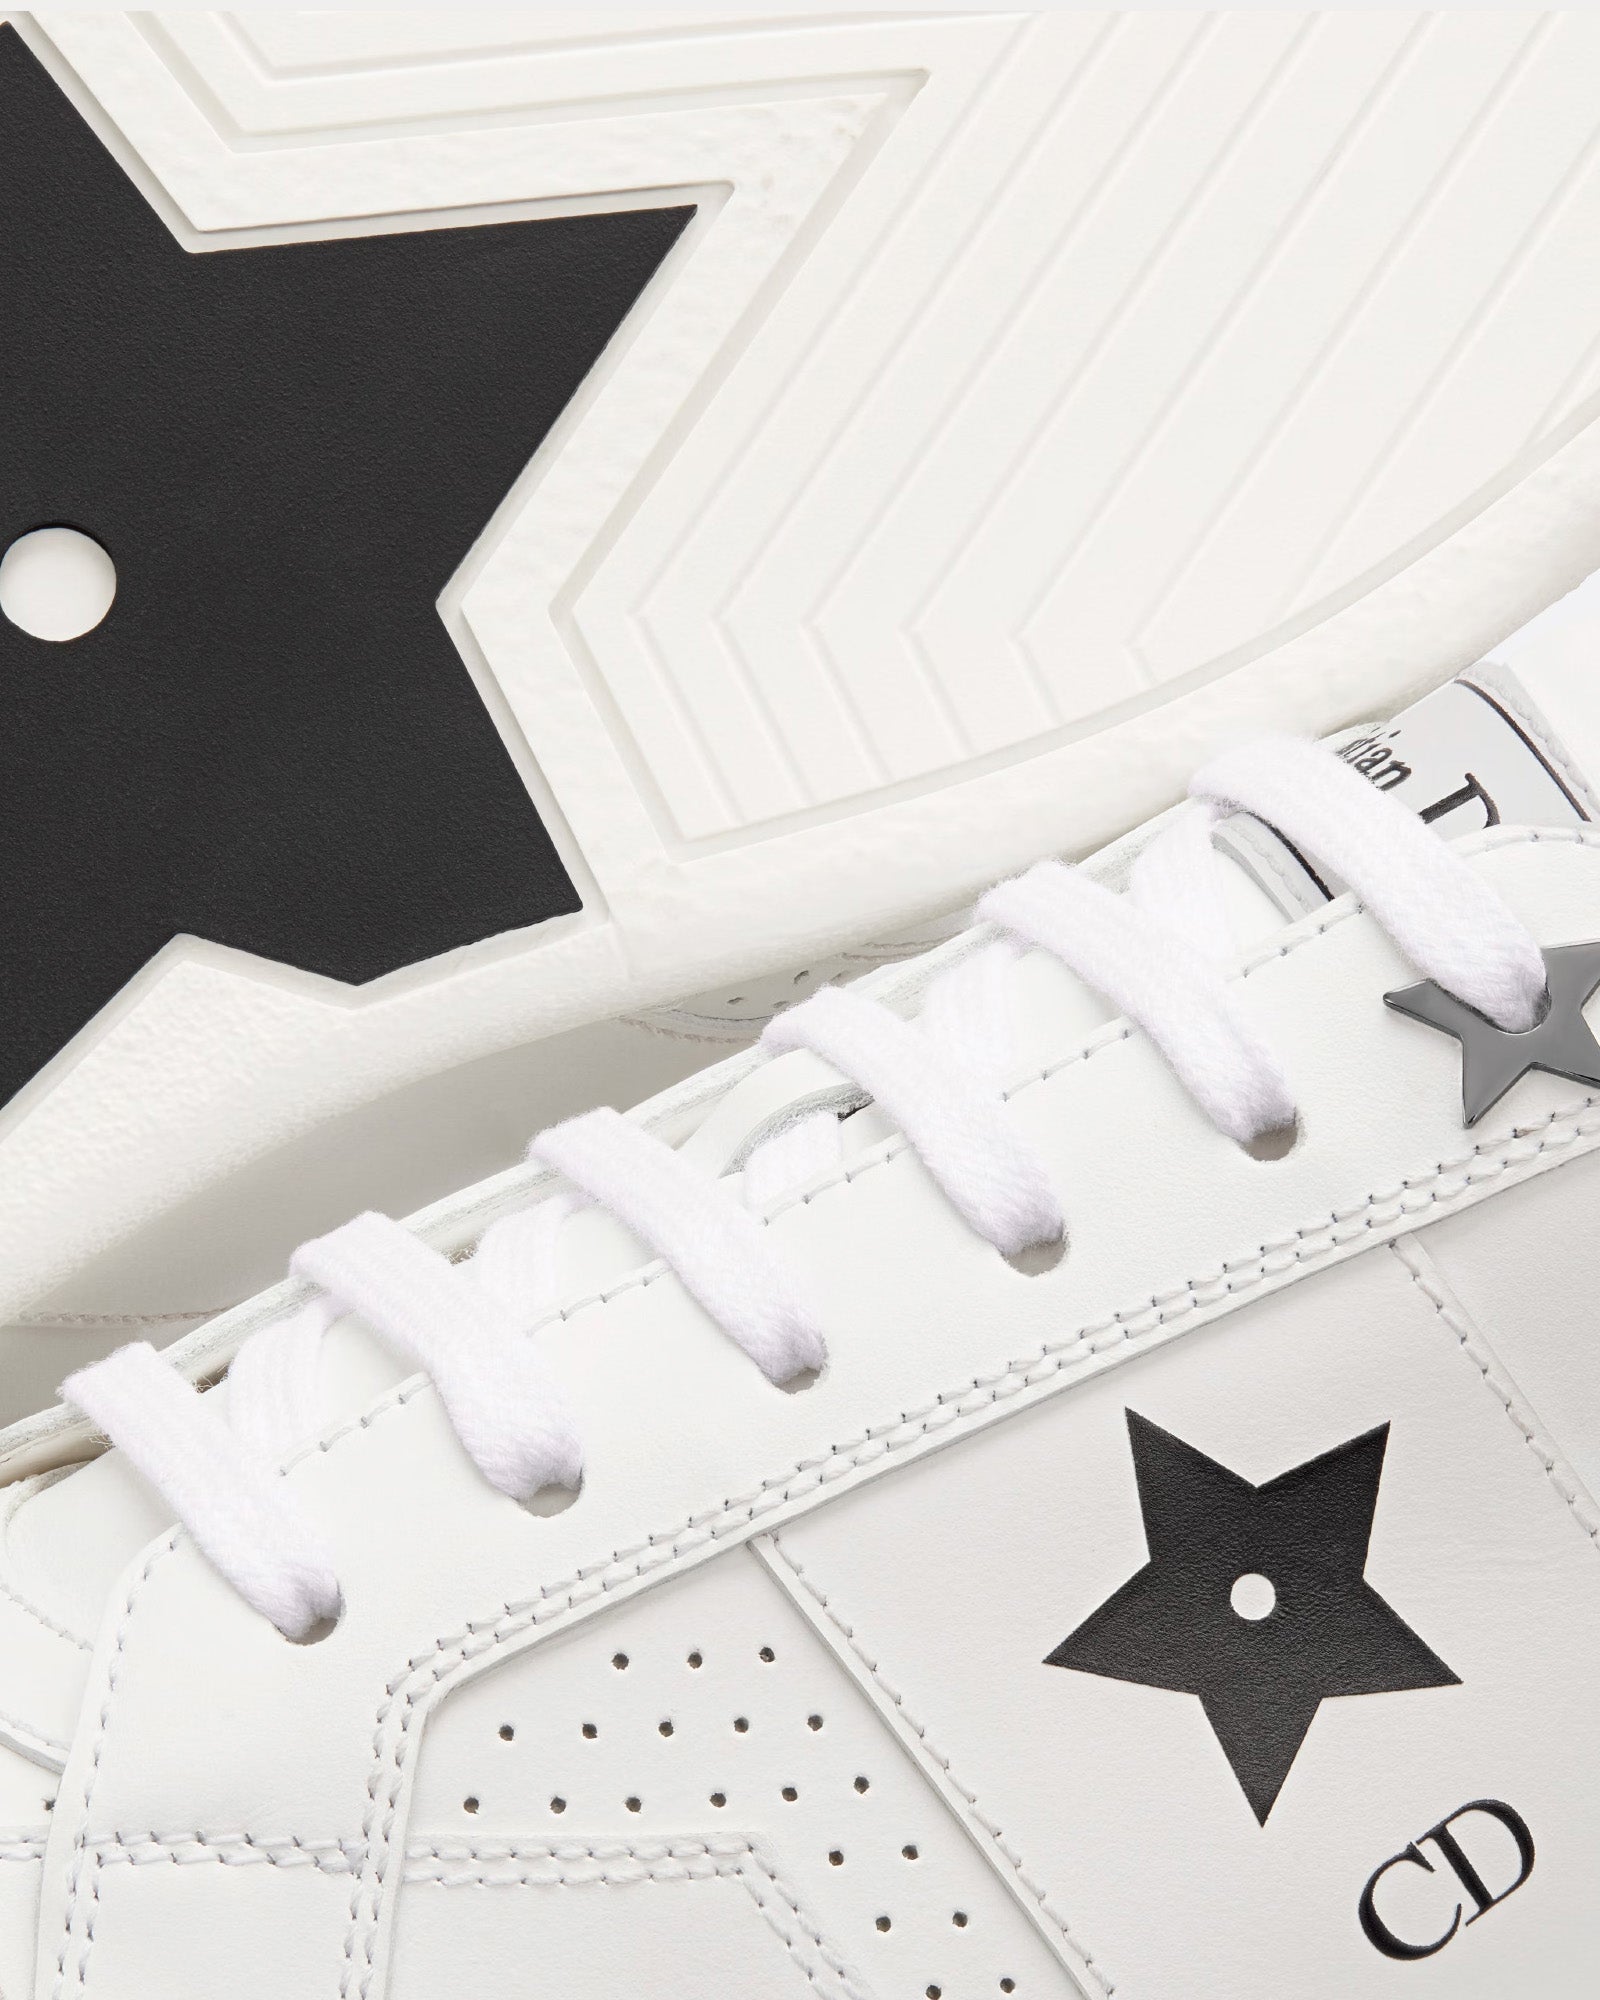 Dior - Dior Star Calfskin & Suede White / Black Low Top Sneakers